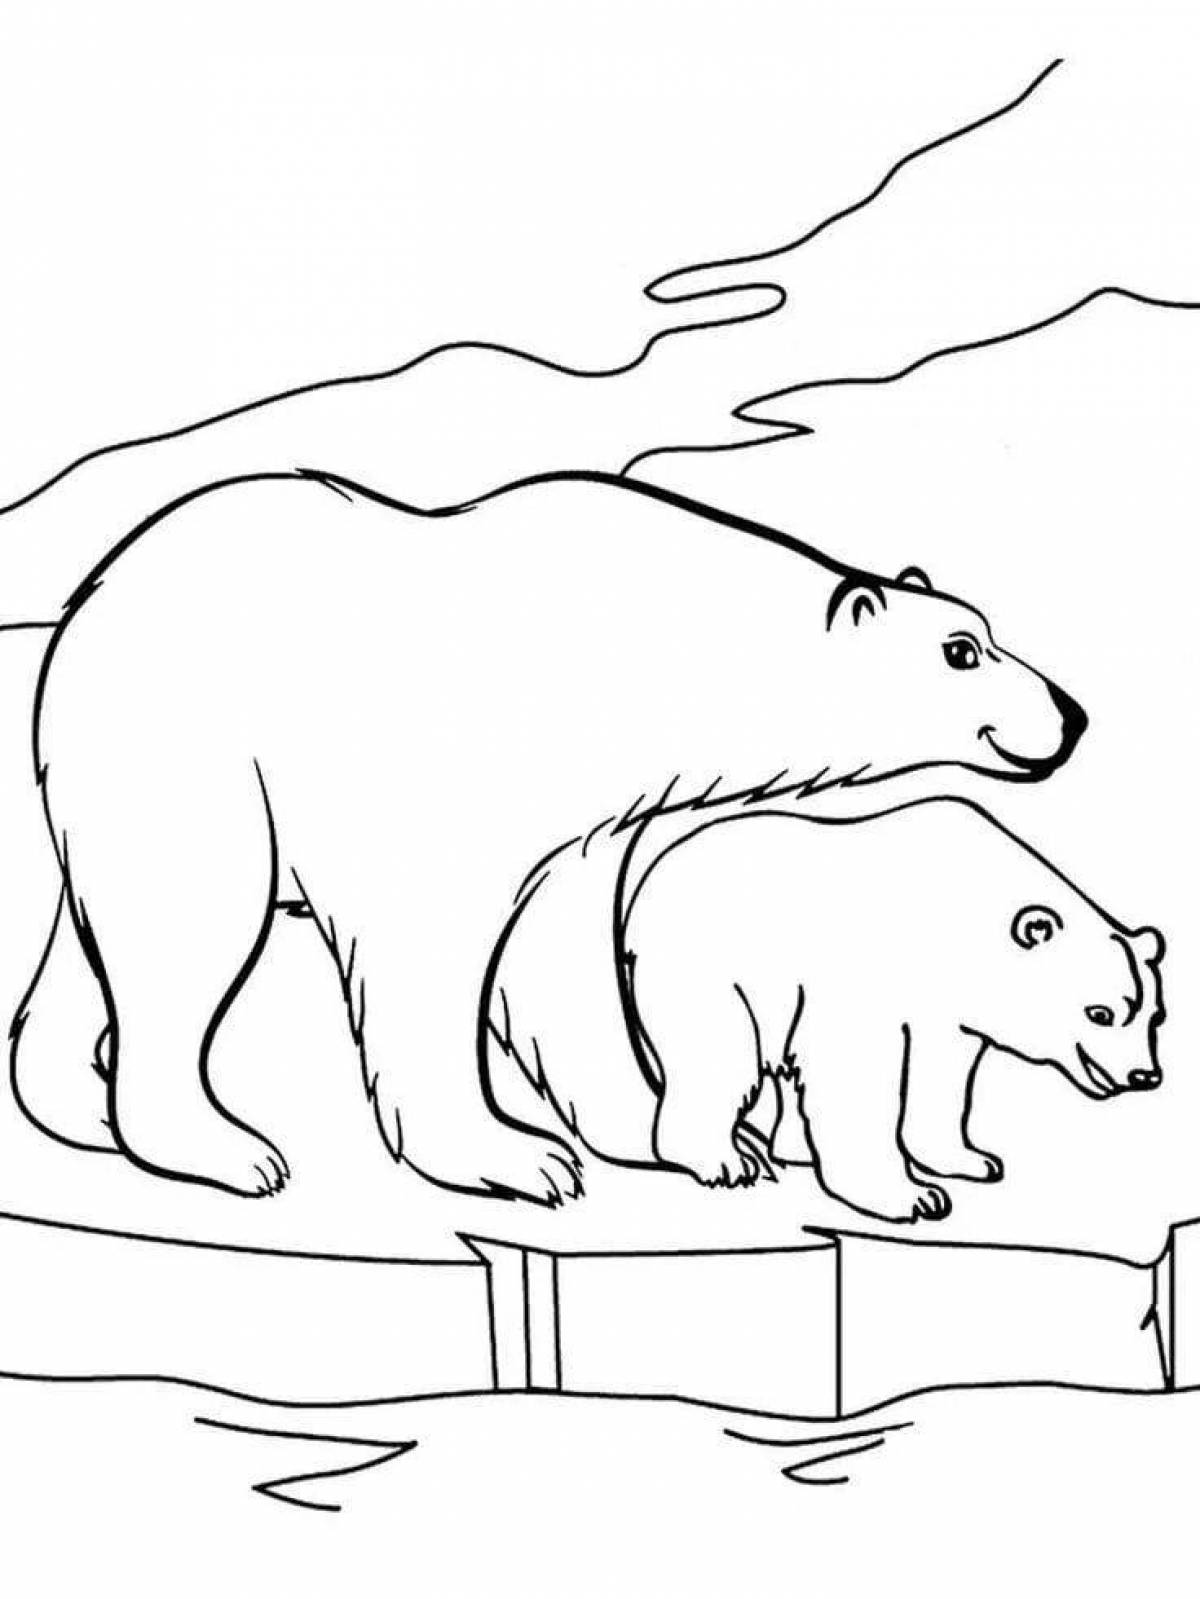 Northern animals coloring book